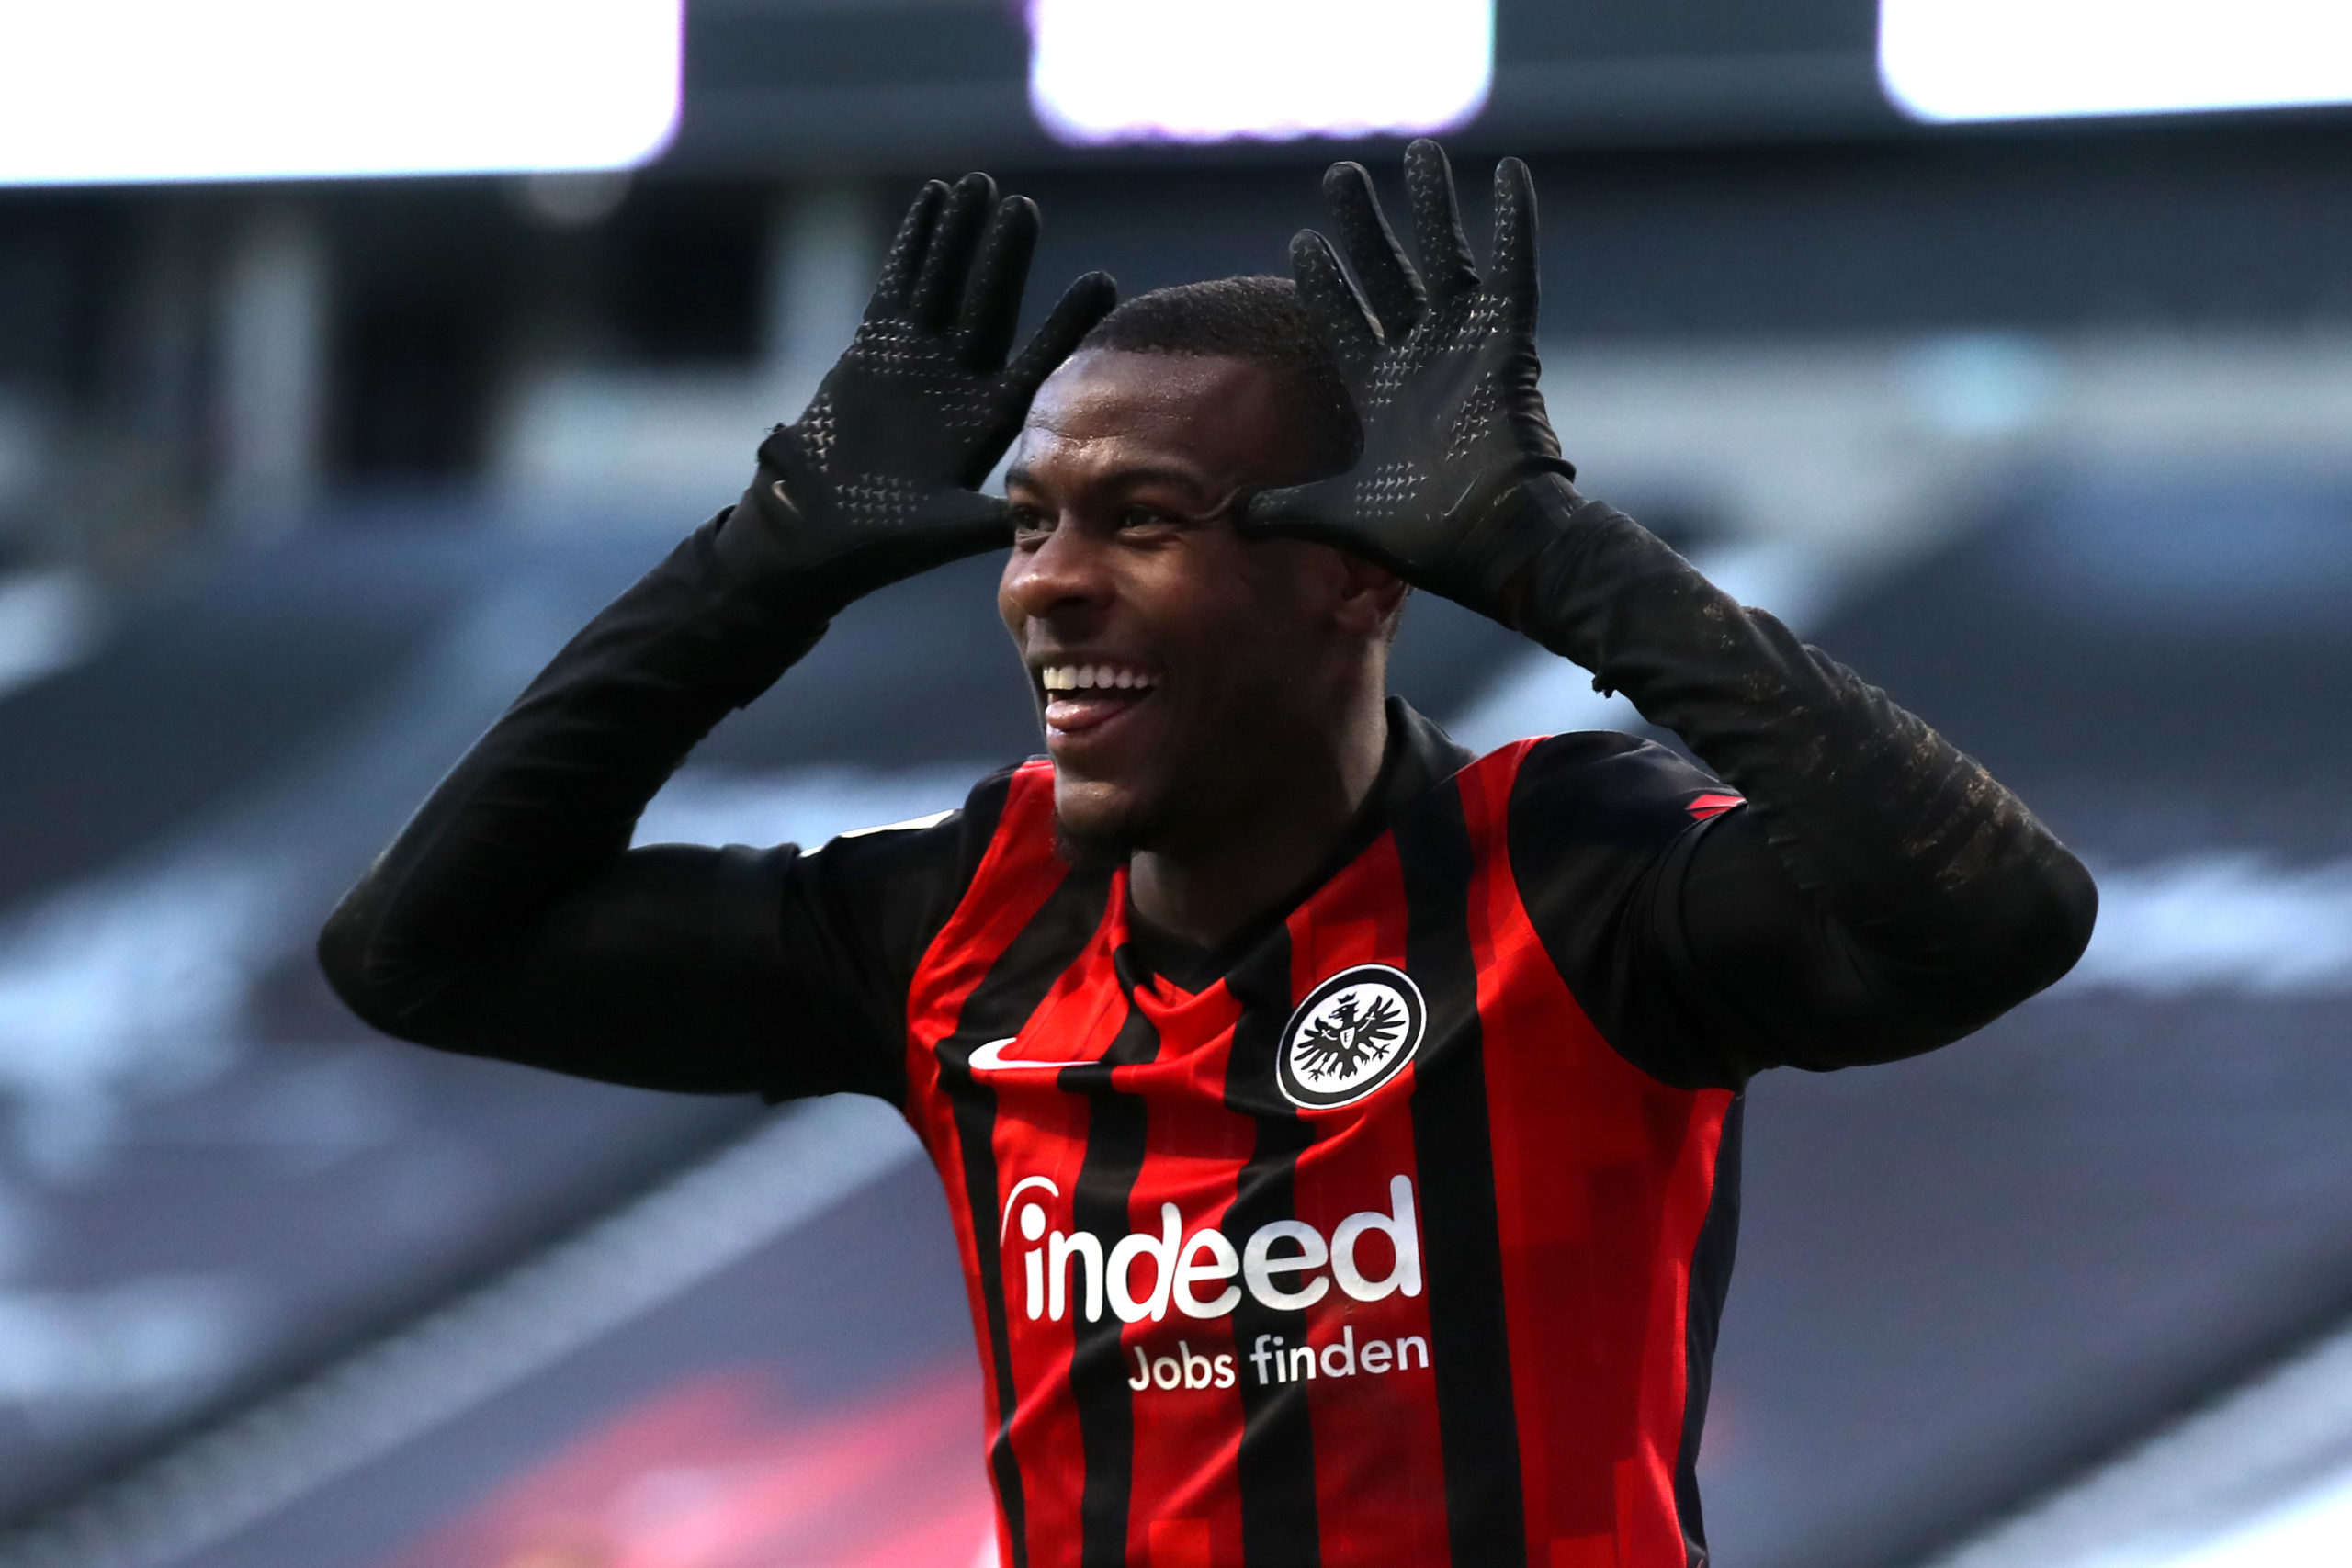 Milan reportedly have expressed interest in shoring up their defense with Frankfurt youngster Evan N'Dicka, having scouted him for the past two seasons.